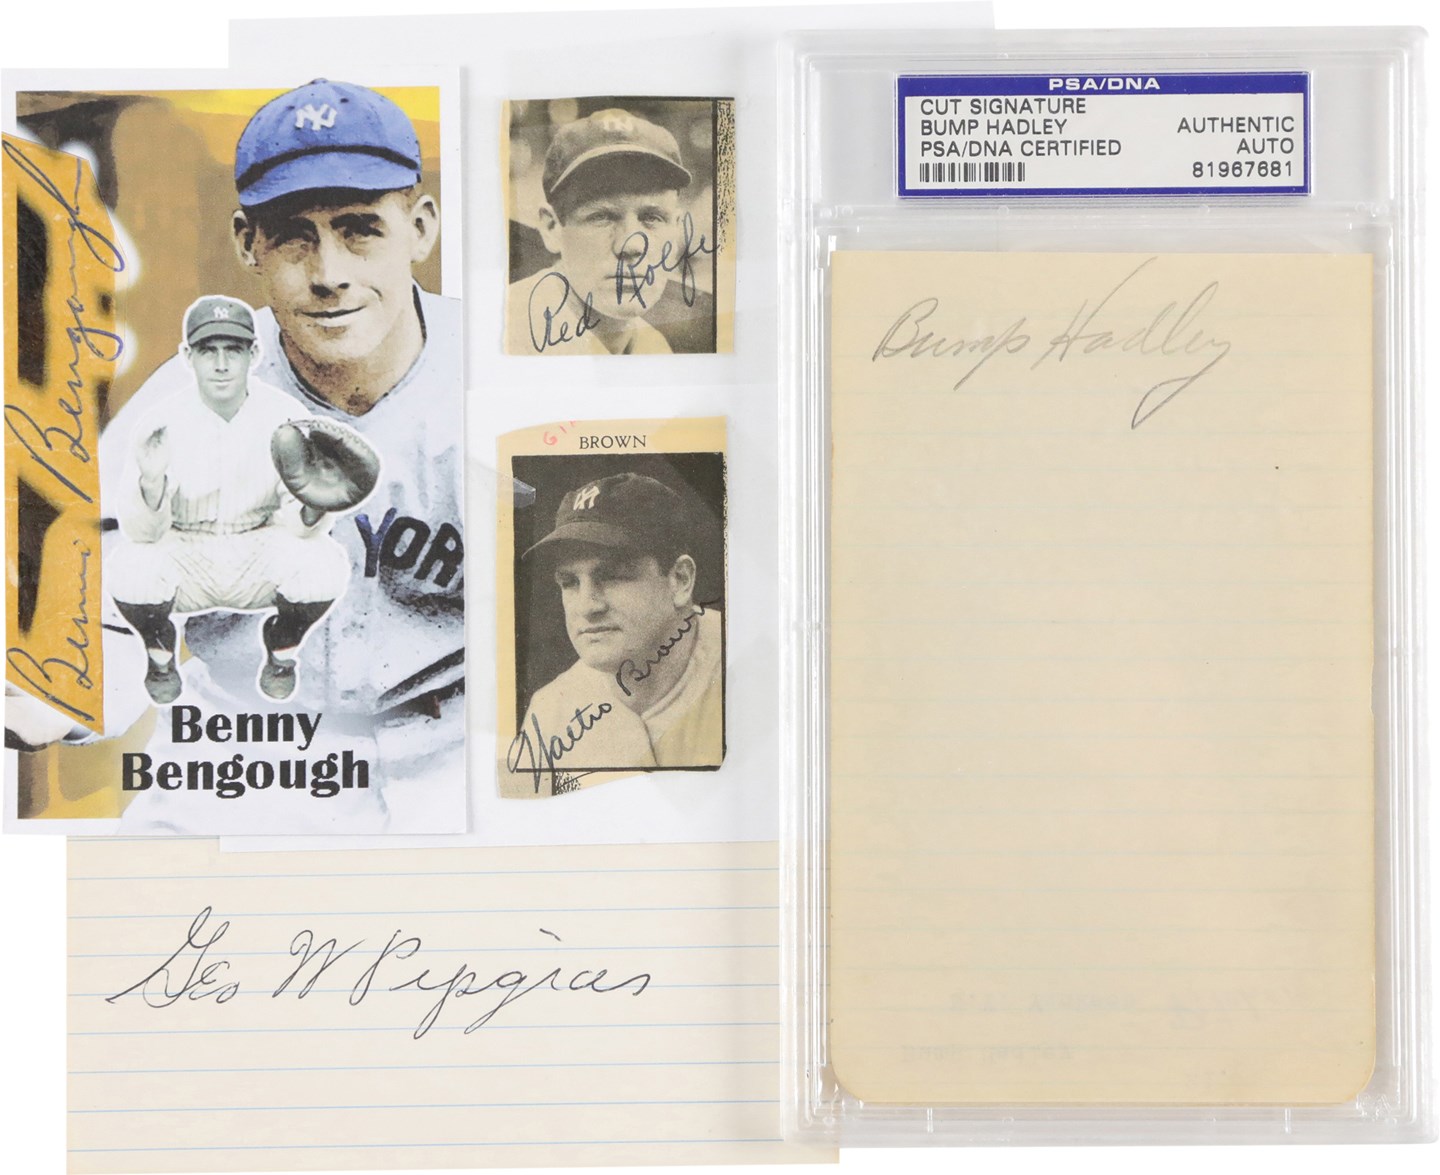 Baseball Autographs - 1920s & 1930s New York Yankees Players & Trainers Signed Cut Collection w/Rarities (13) All JSA or PSA